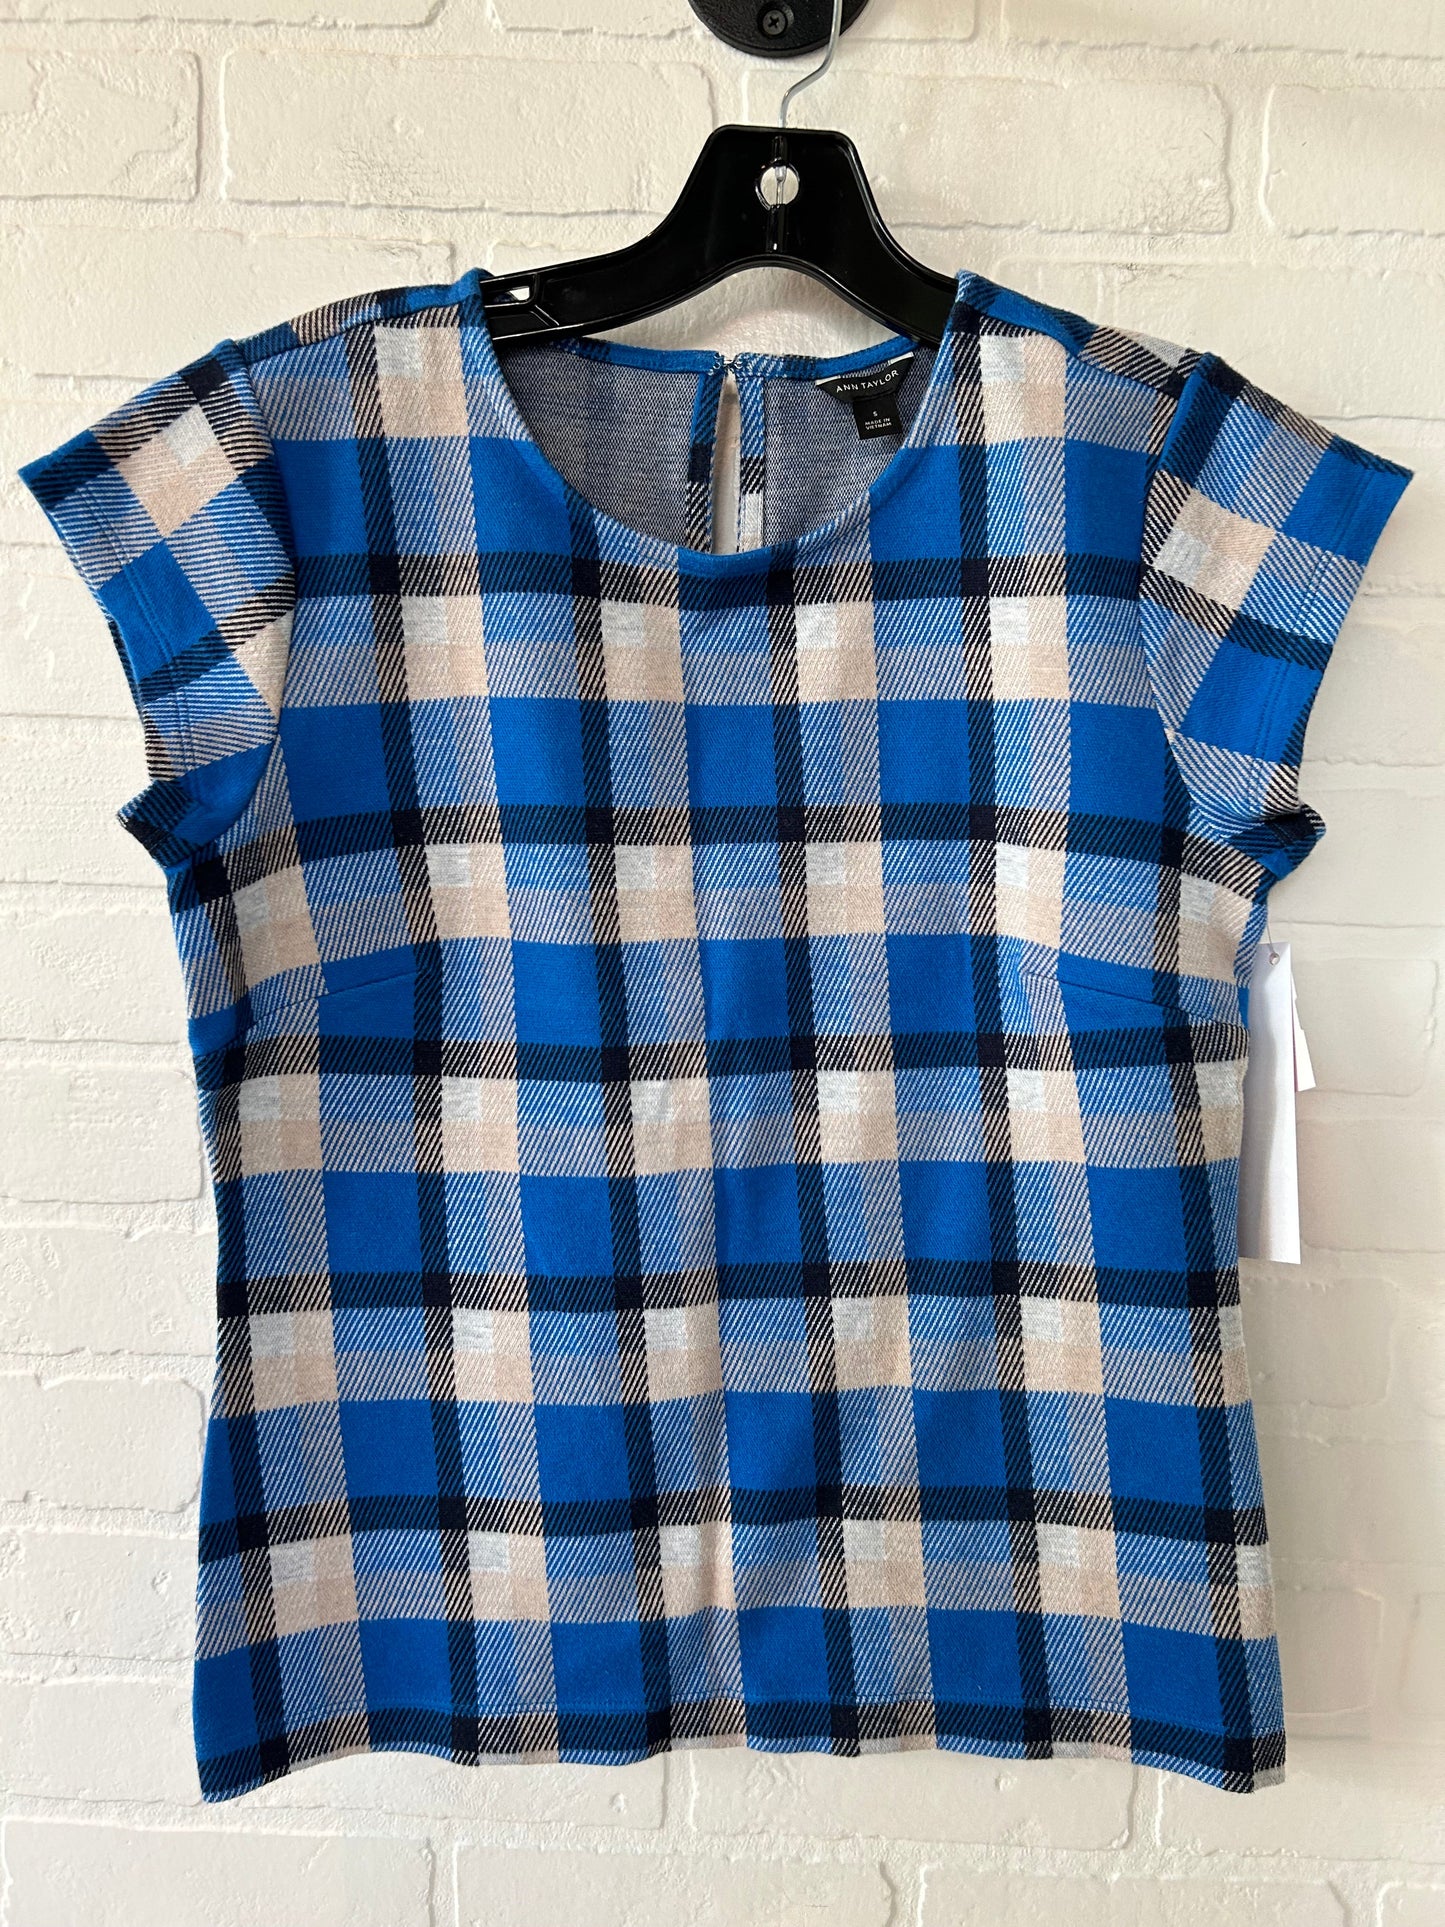 Blue & Brown Top Short Sleeve Ann Taylor, Size S